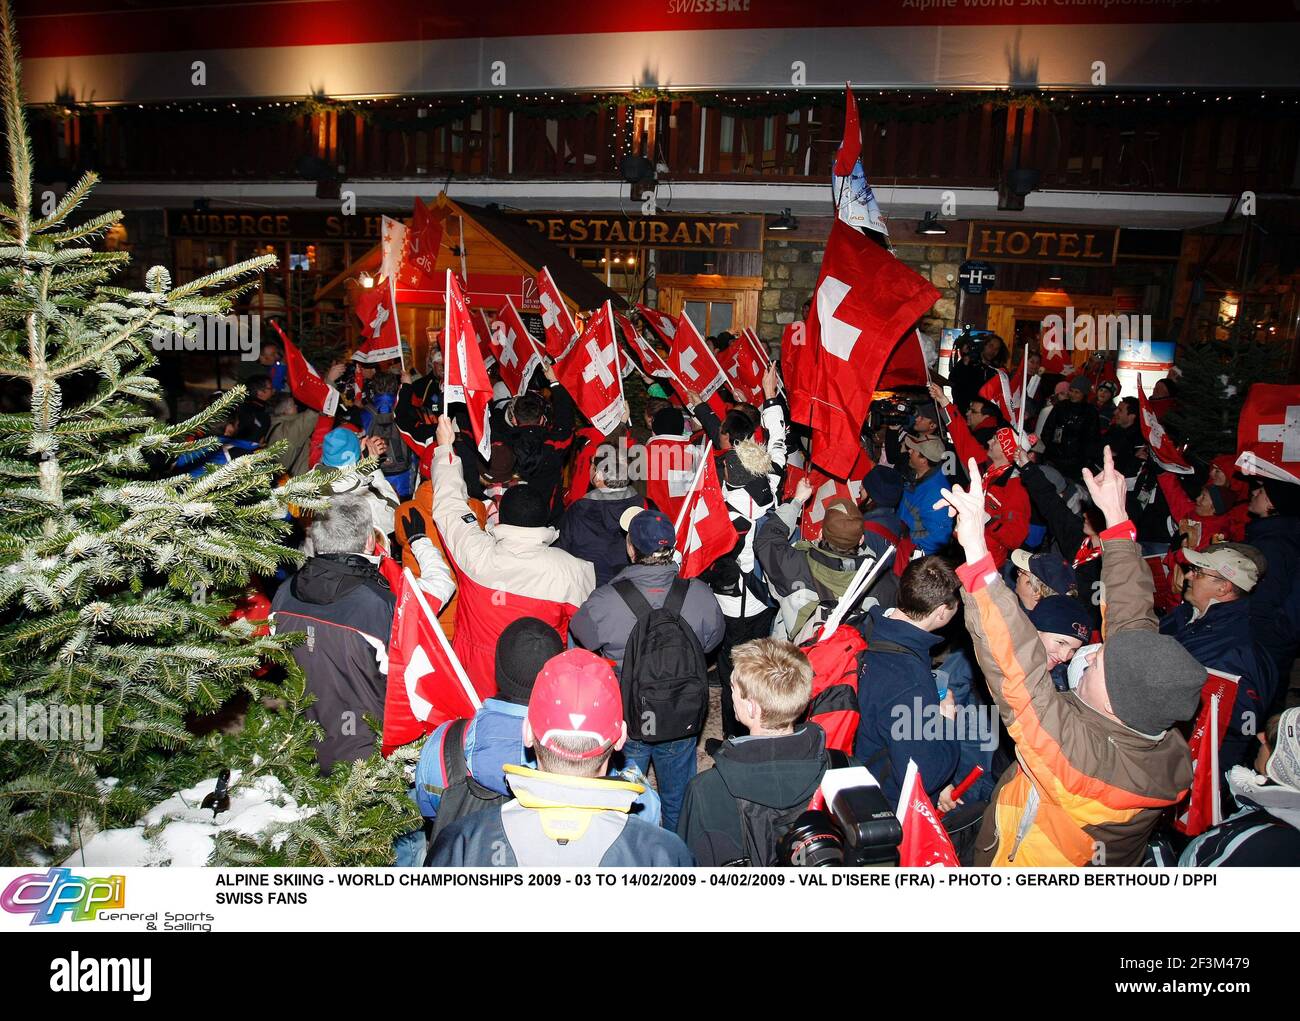 ALPINE SKIING - WORLD CHAMPIONSHIPS 2009 - 03 TO 14/02/2009 - 04/02/2009 - VAL D'ISERE (FRA) - PHOTO : GERARD BERTHOUD / DPPI SWISS FANS Stock Photo